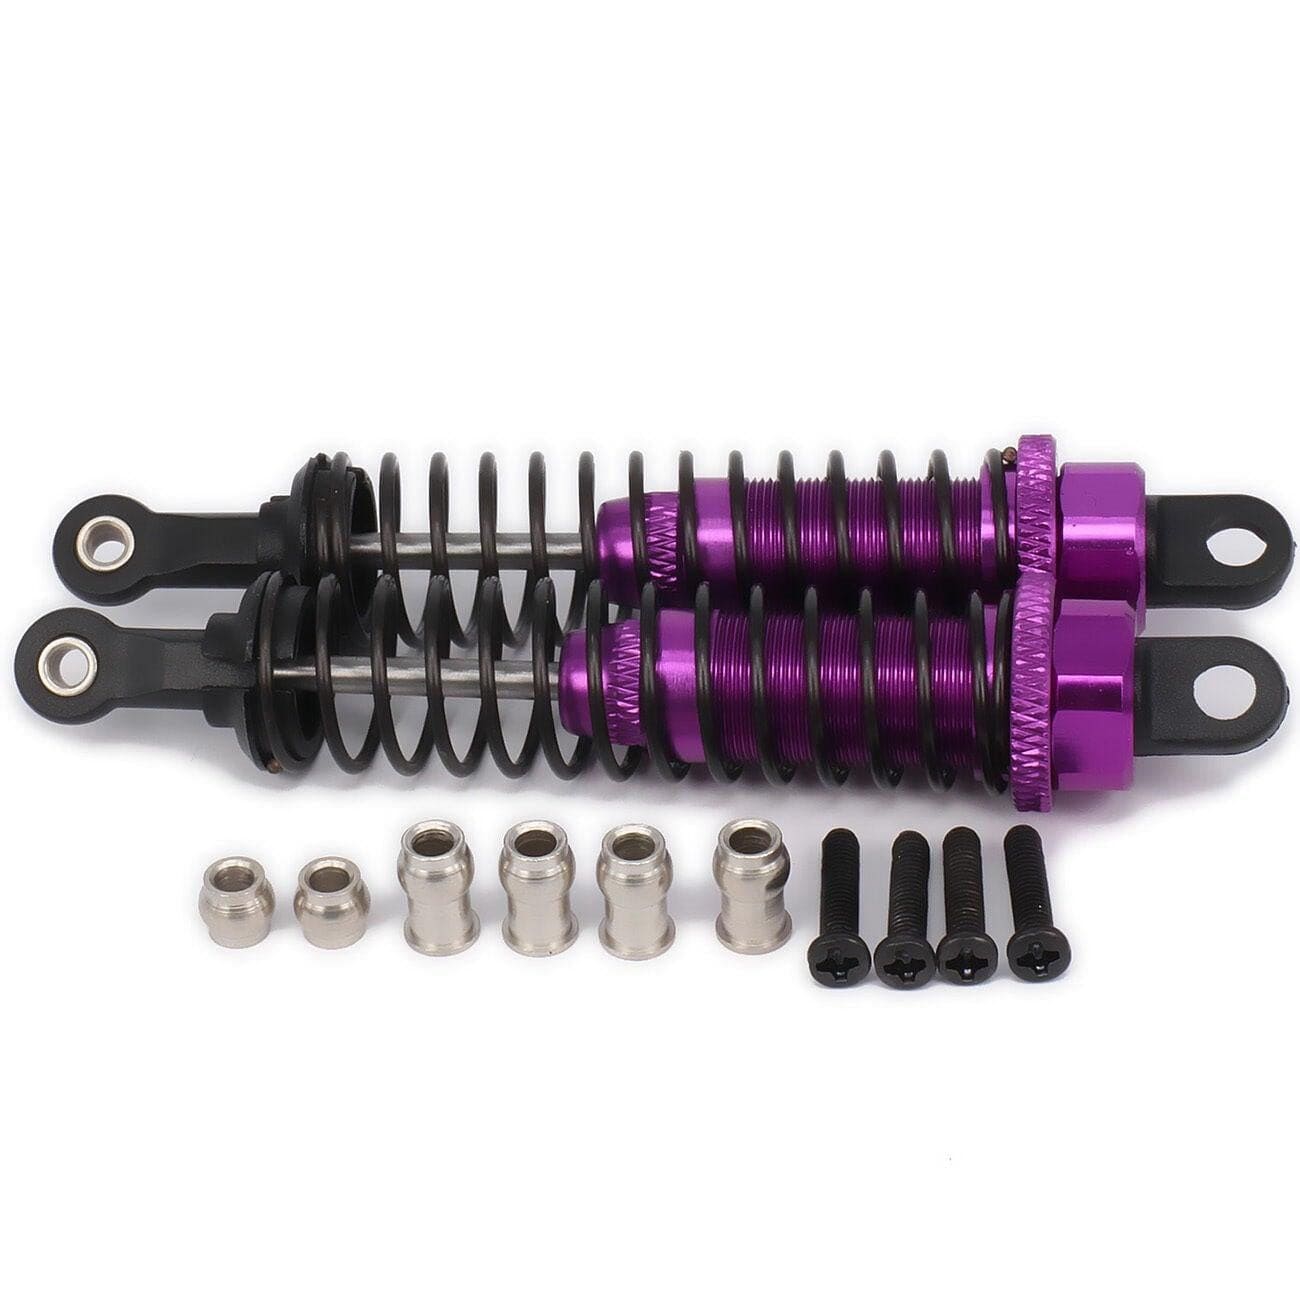 RCAWD RC CAR UPGRADE PARTS Purple RCAWD 80mm Shock Absorber Damper Oil Adjustable Style for 1/16 Rc Car 2pcs